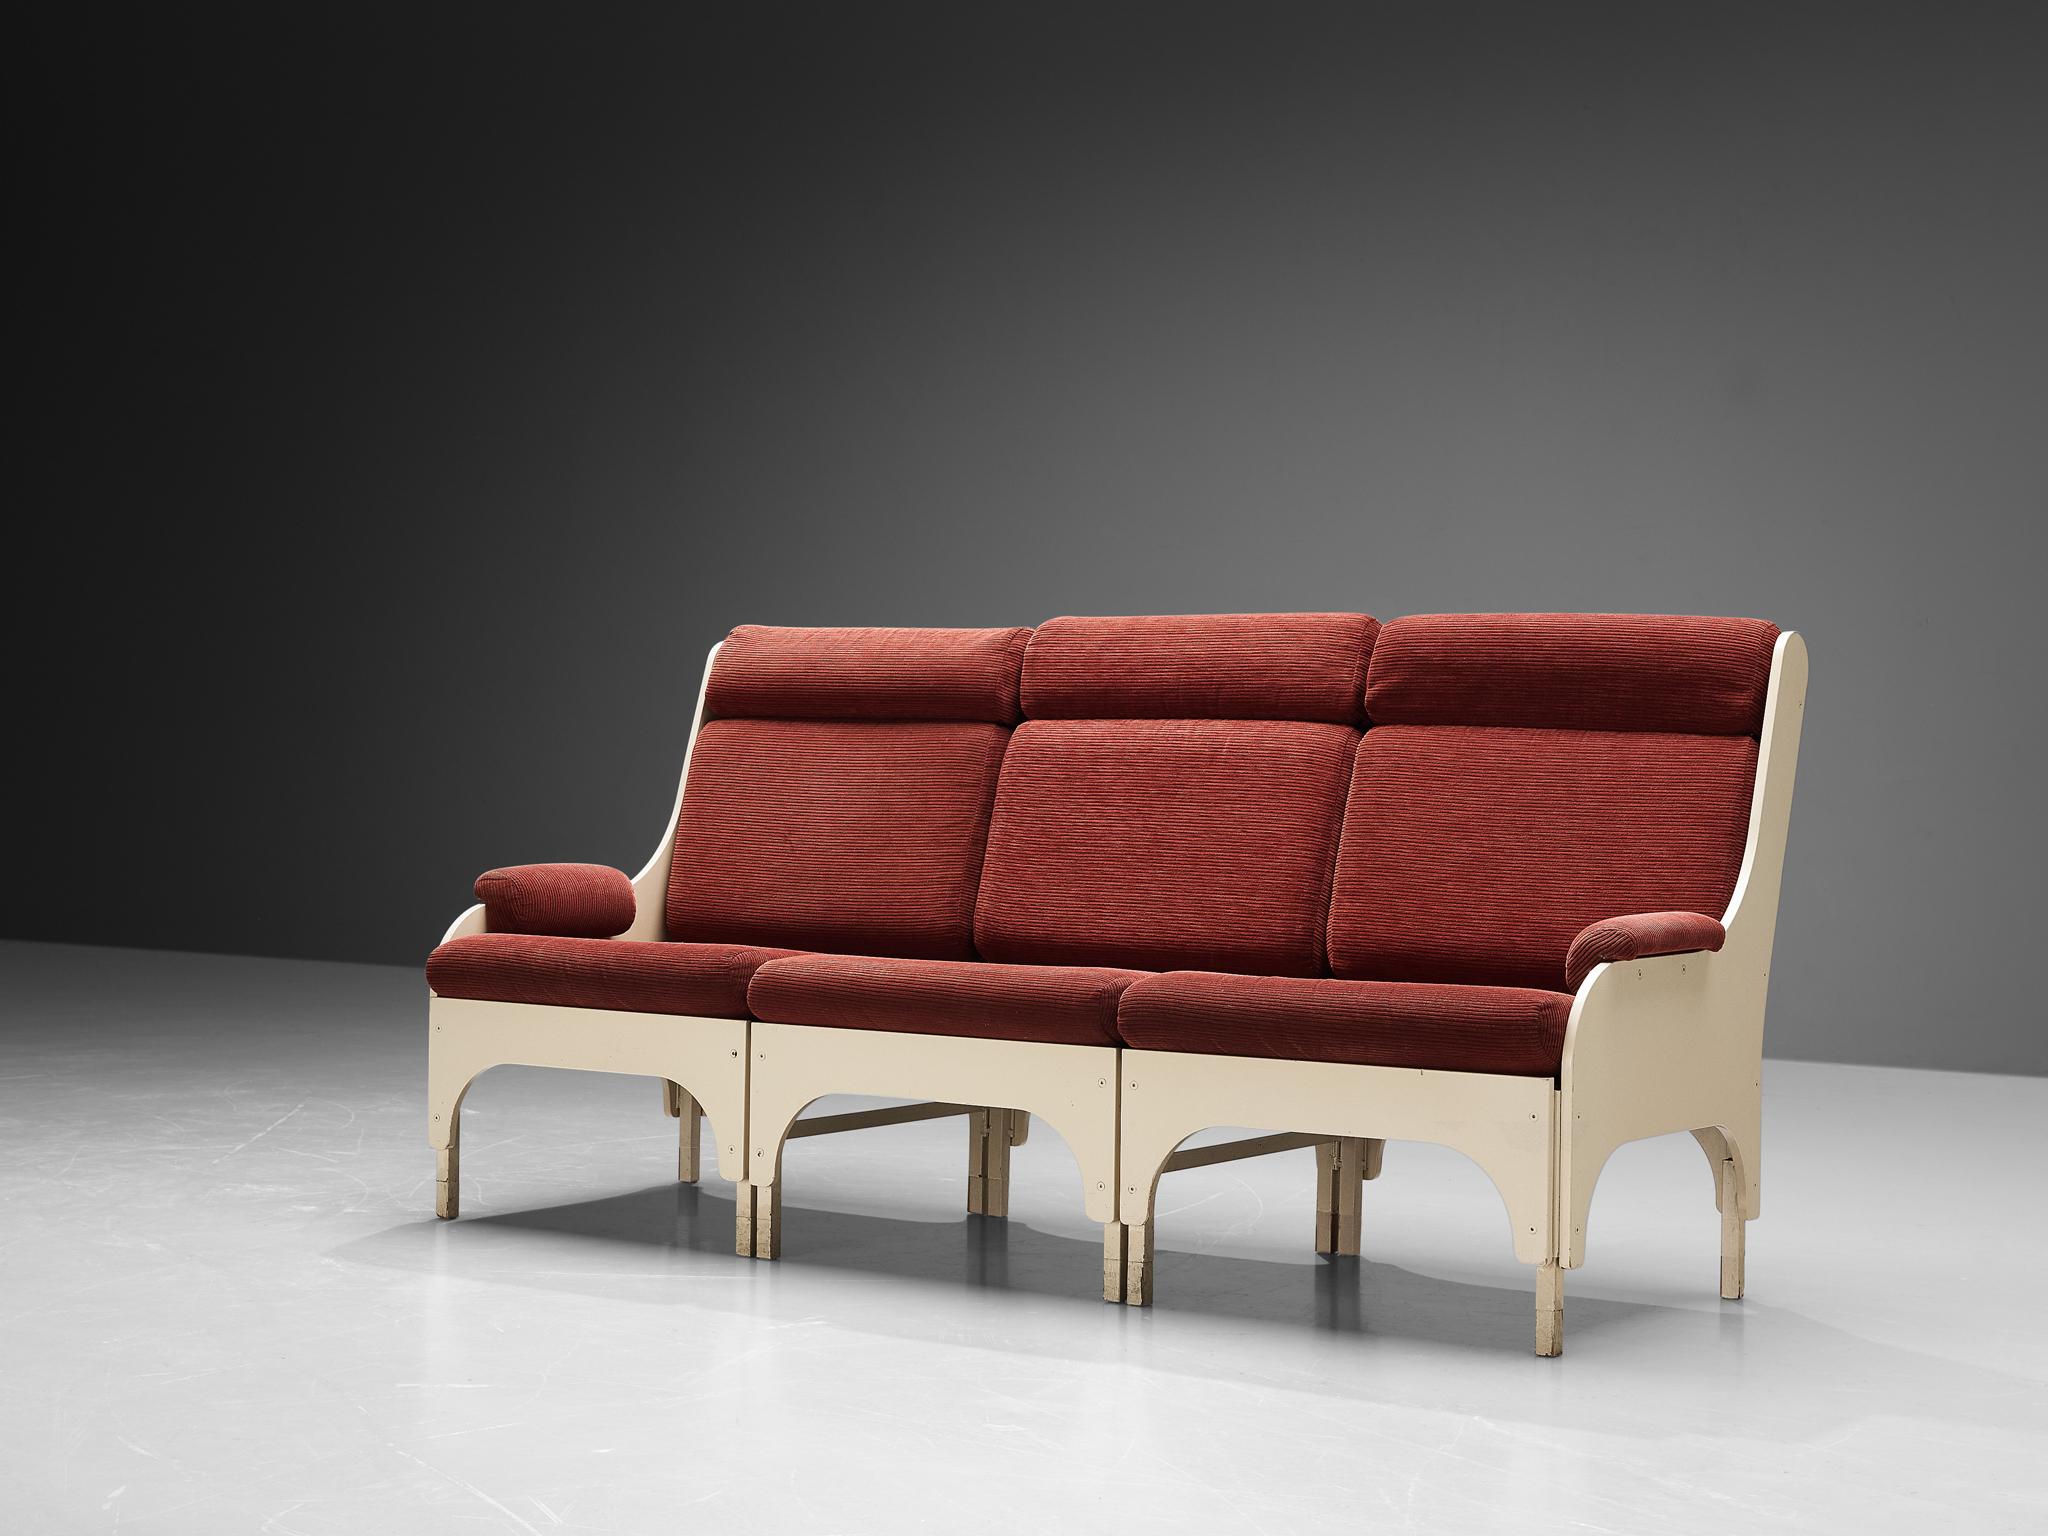 Sofa, lacquered wood, fabric, The Netherlands, 1980s 

This sofa is characterized by a solid construction, featuring clear lines and striking curved shapes. Notice the architecturally built base that is composed of wide arches, which resembles the